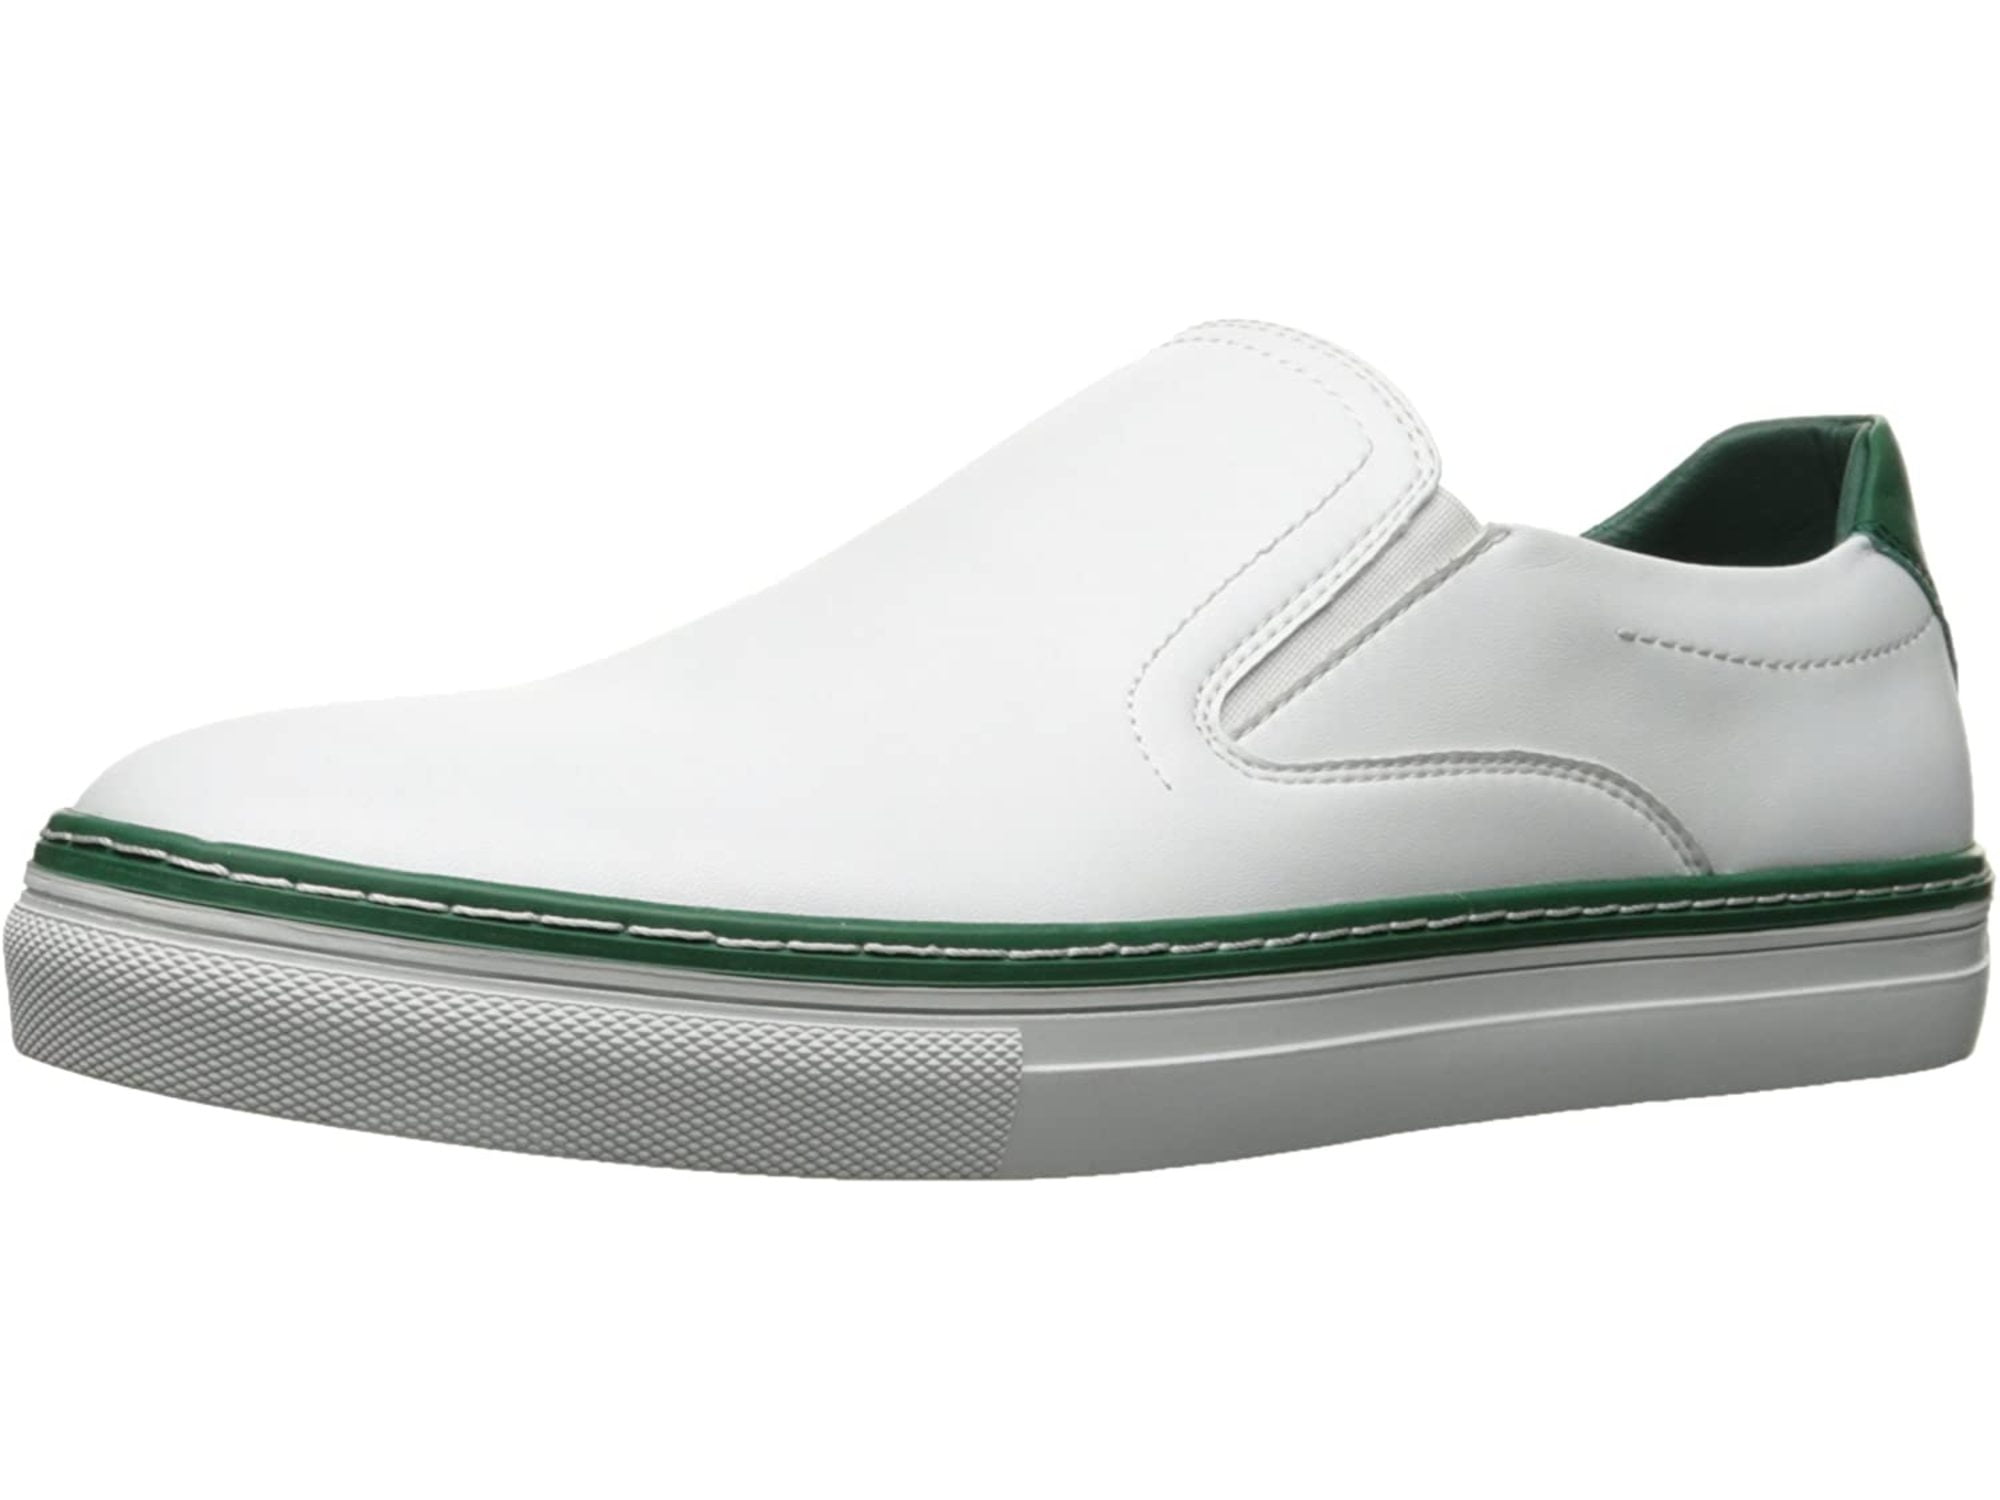 Dunlop Mens Gary Canvas Trainers Classic Slip On Beach Summer Plimsoll Shoes 